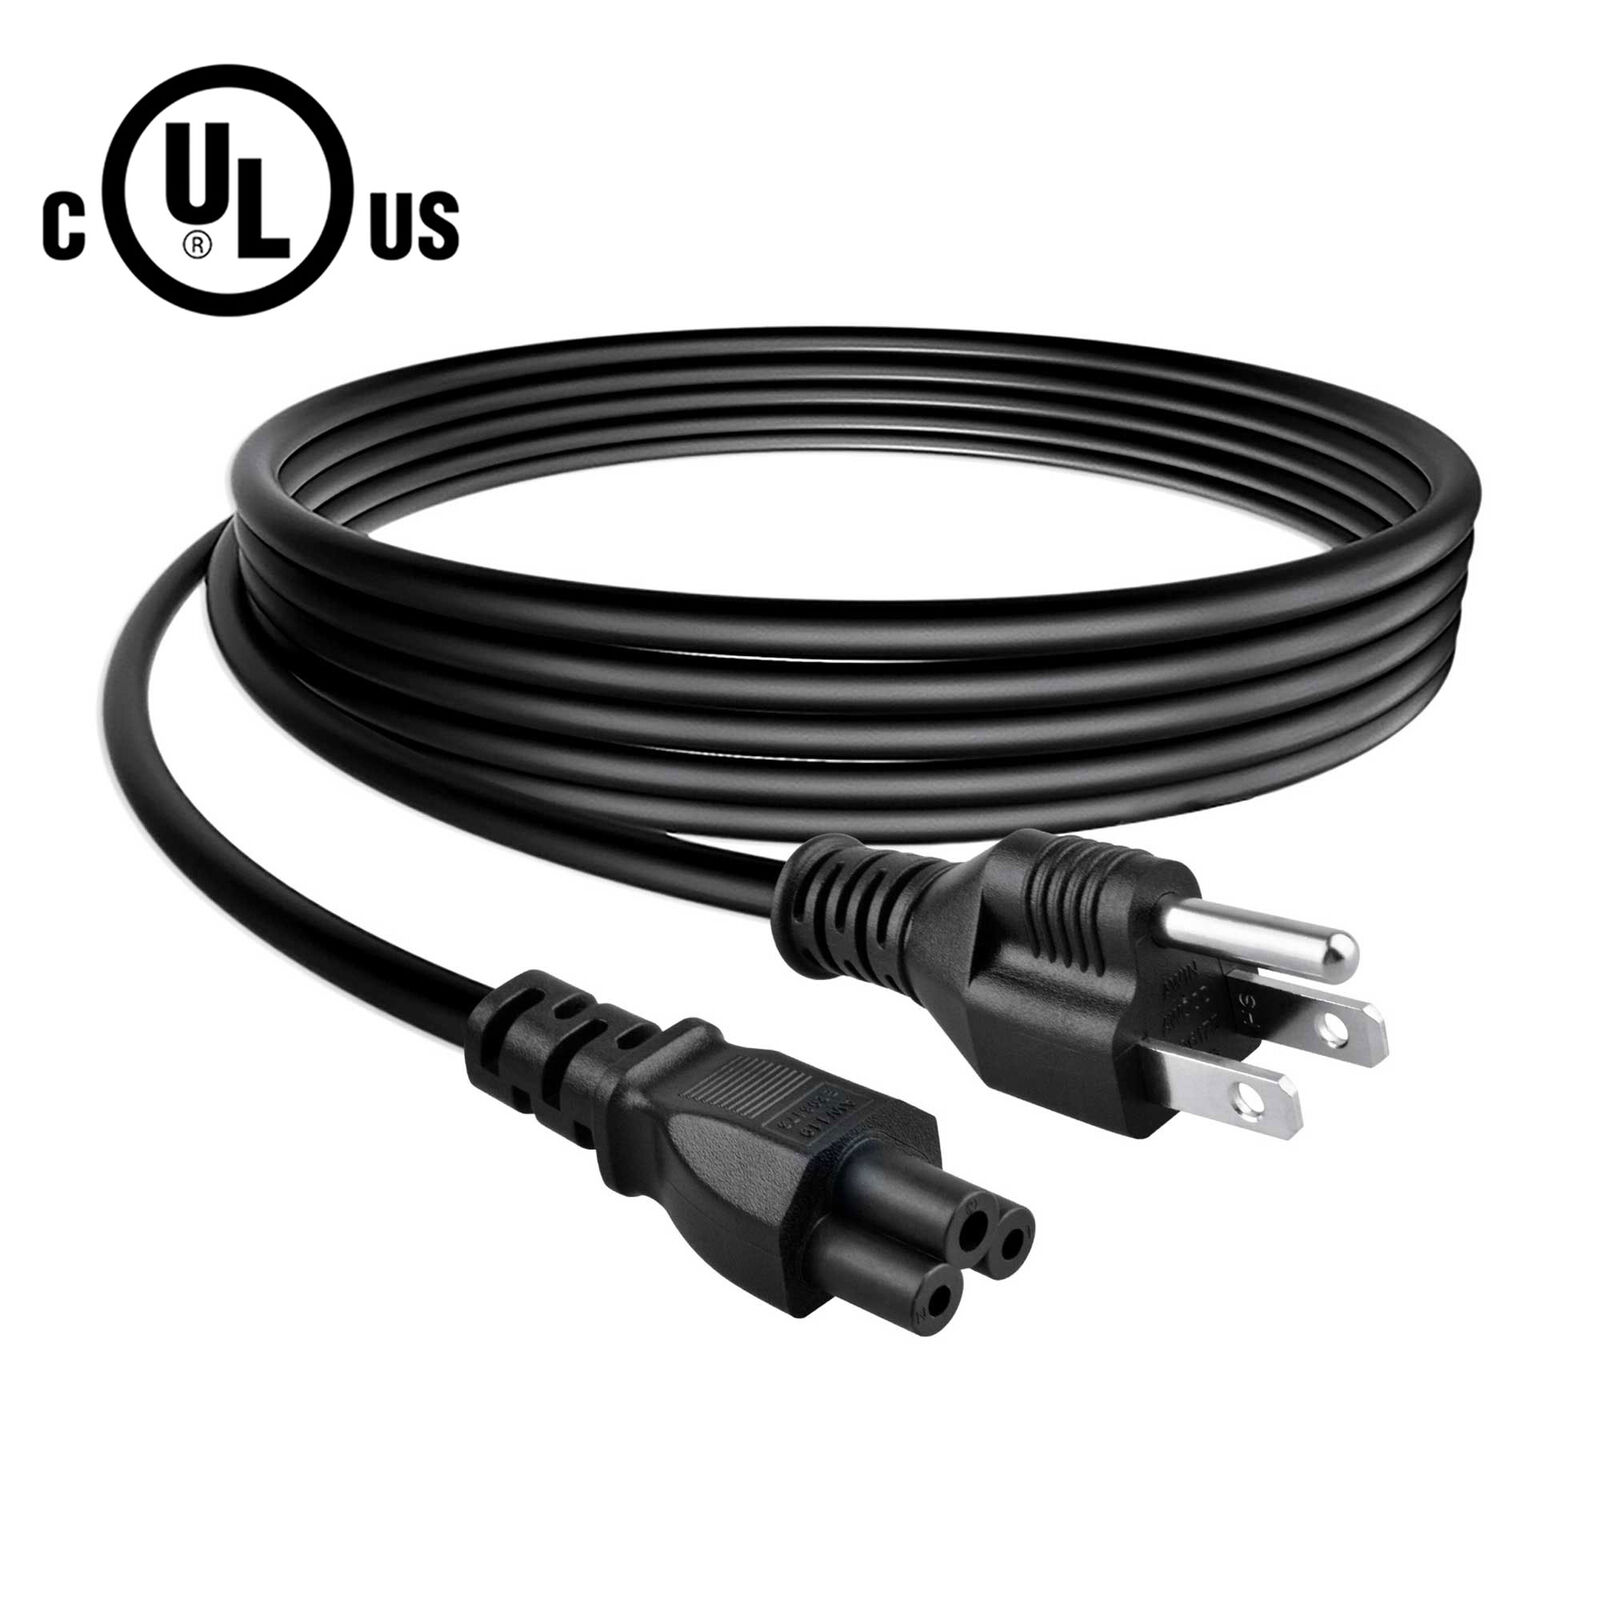 5ft UL AC Power Cord Cable For Direct TV Satellite Outlet US Adapter 3-Prong